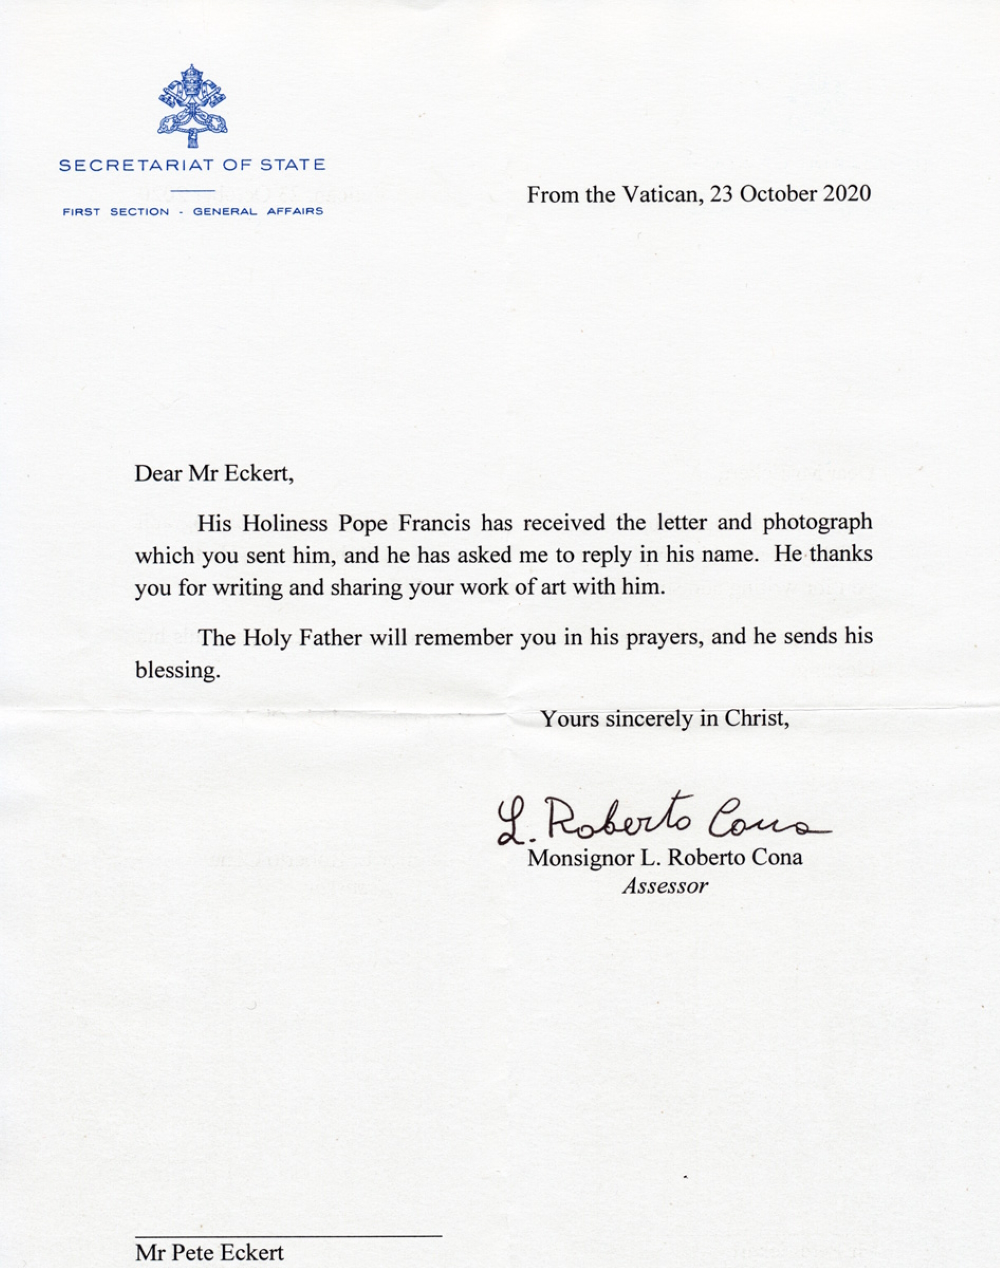 Pope Francis' blessing regarding Mr. Eckert's 'Cathedral' photo.